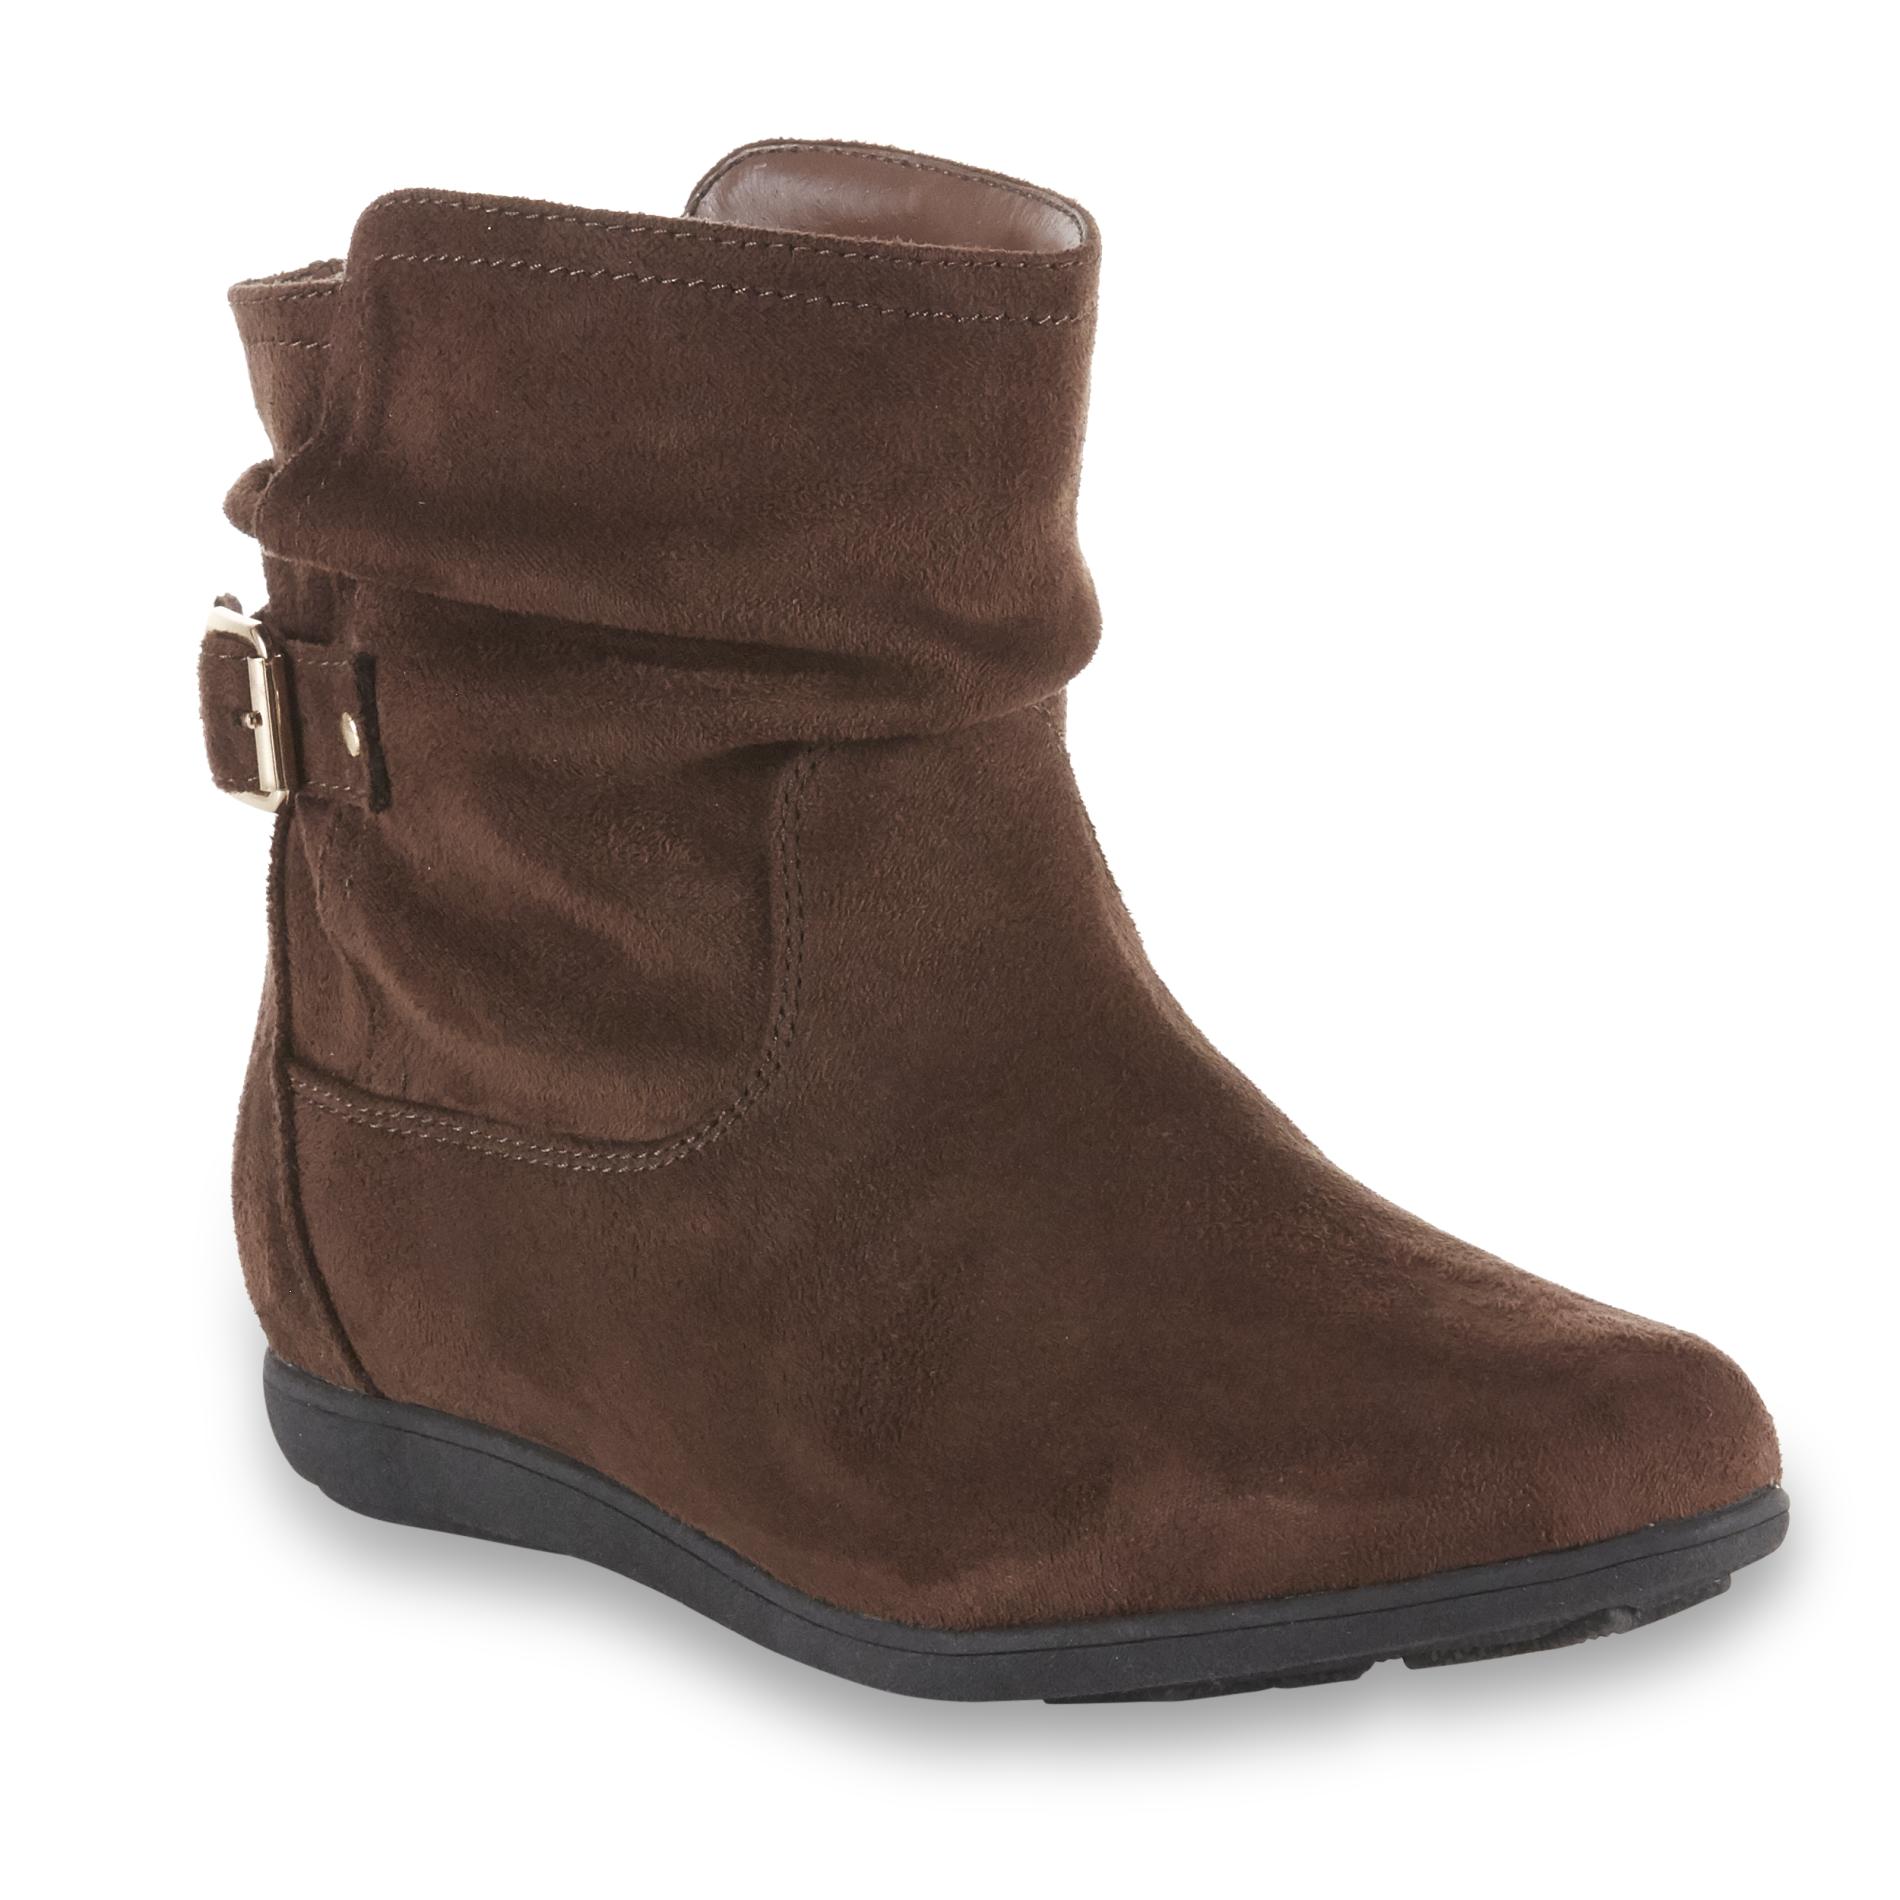 Basic Editions Women's Elliot Slouch Ankle Boot - Dark Brown